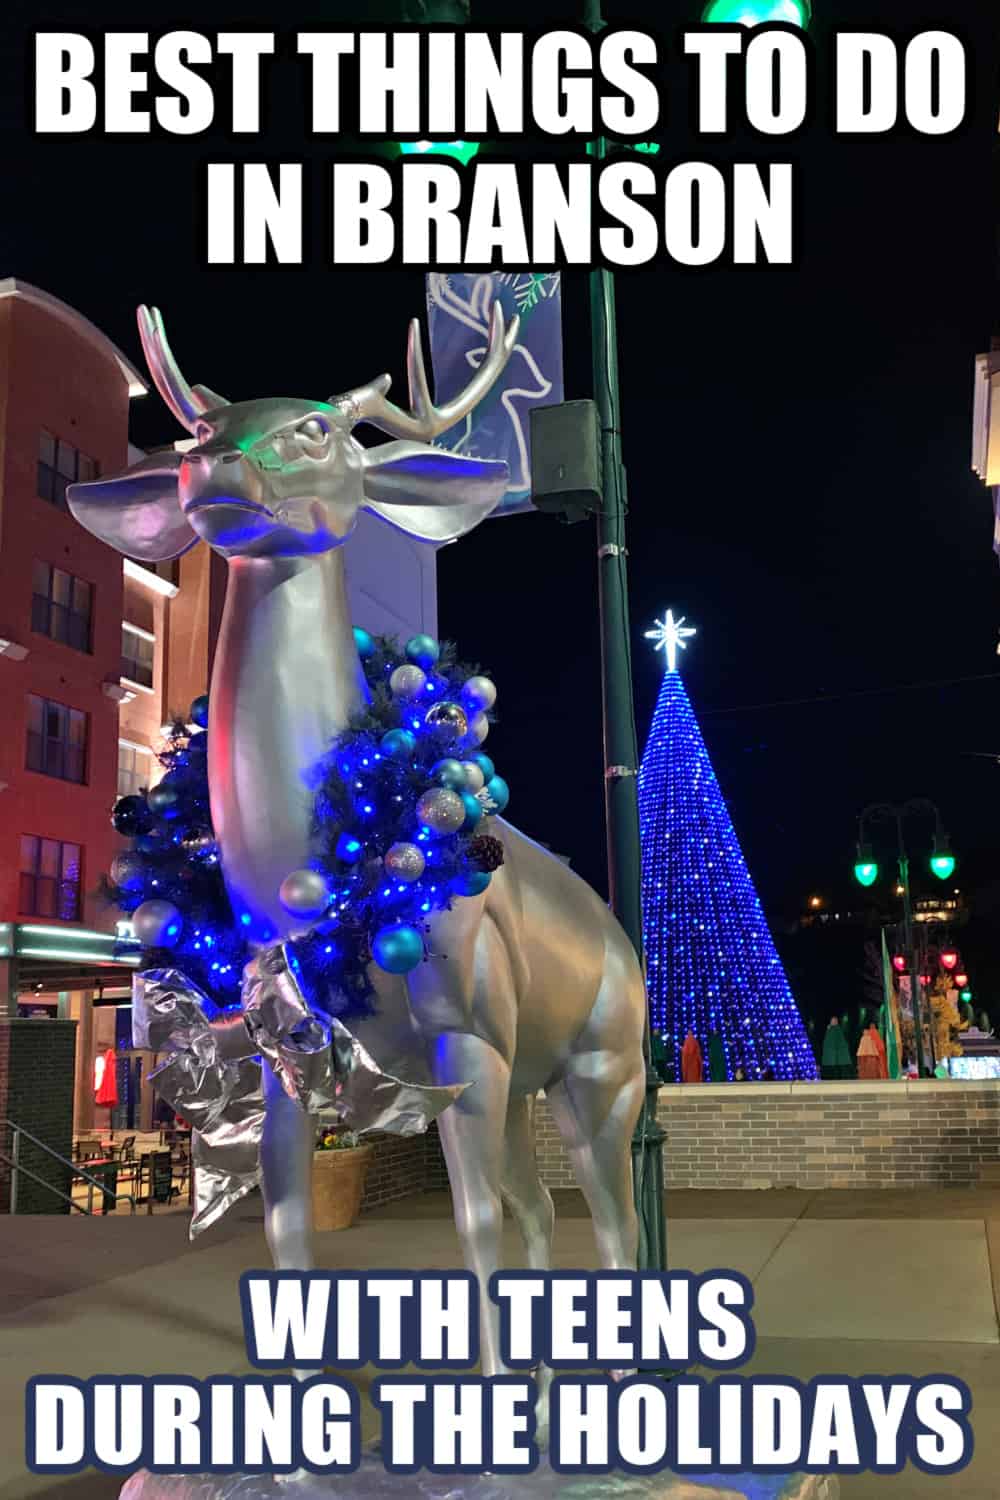 From unbelievable museums to rolling on a river, here are the best things to do in Branson with teens during the holidays or any time of year. #ExploreBranson #Branson #HolidayTravel #FamilyTravel #BransonMO